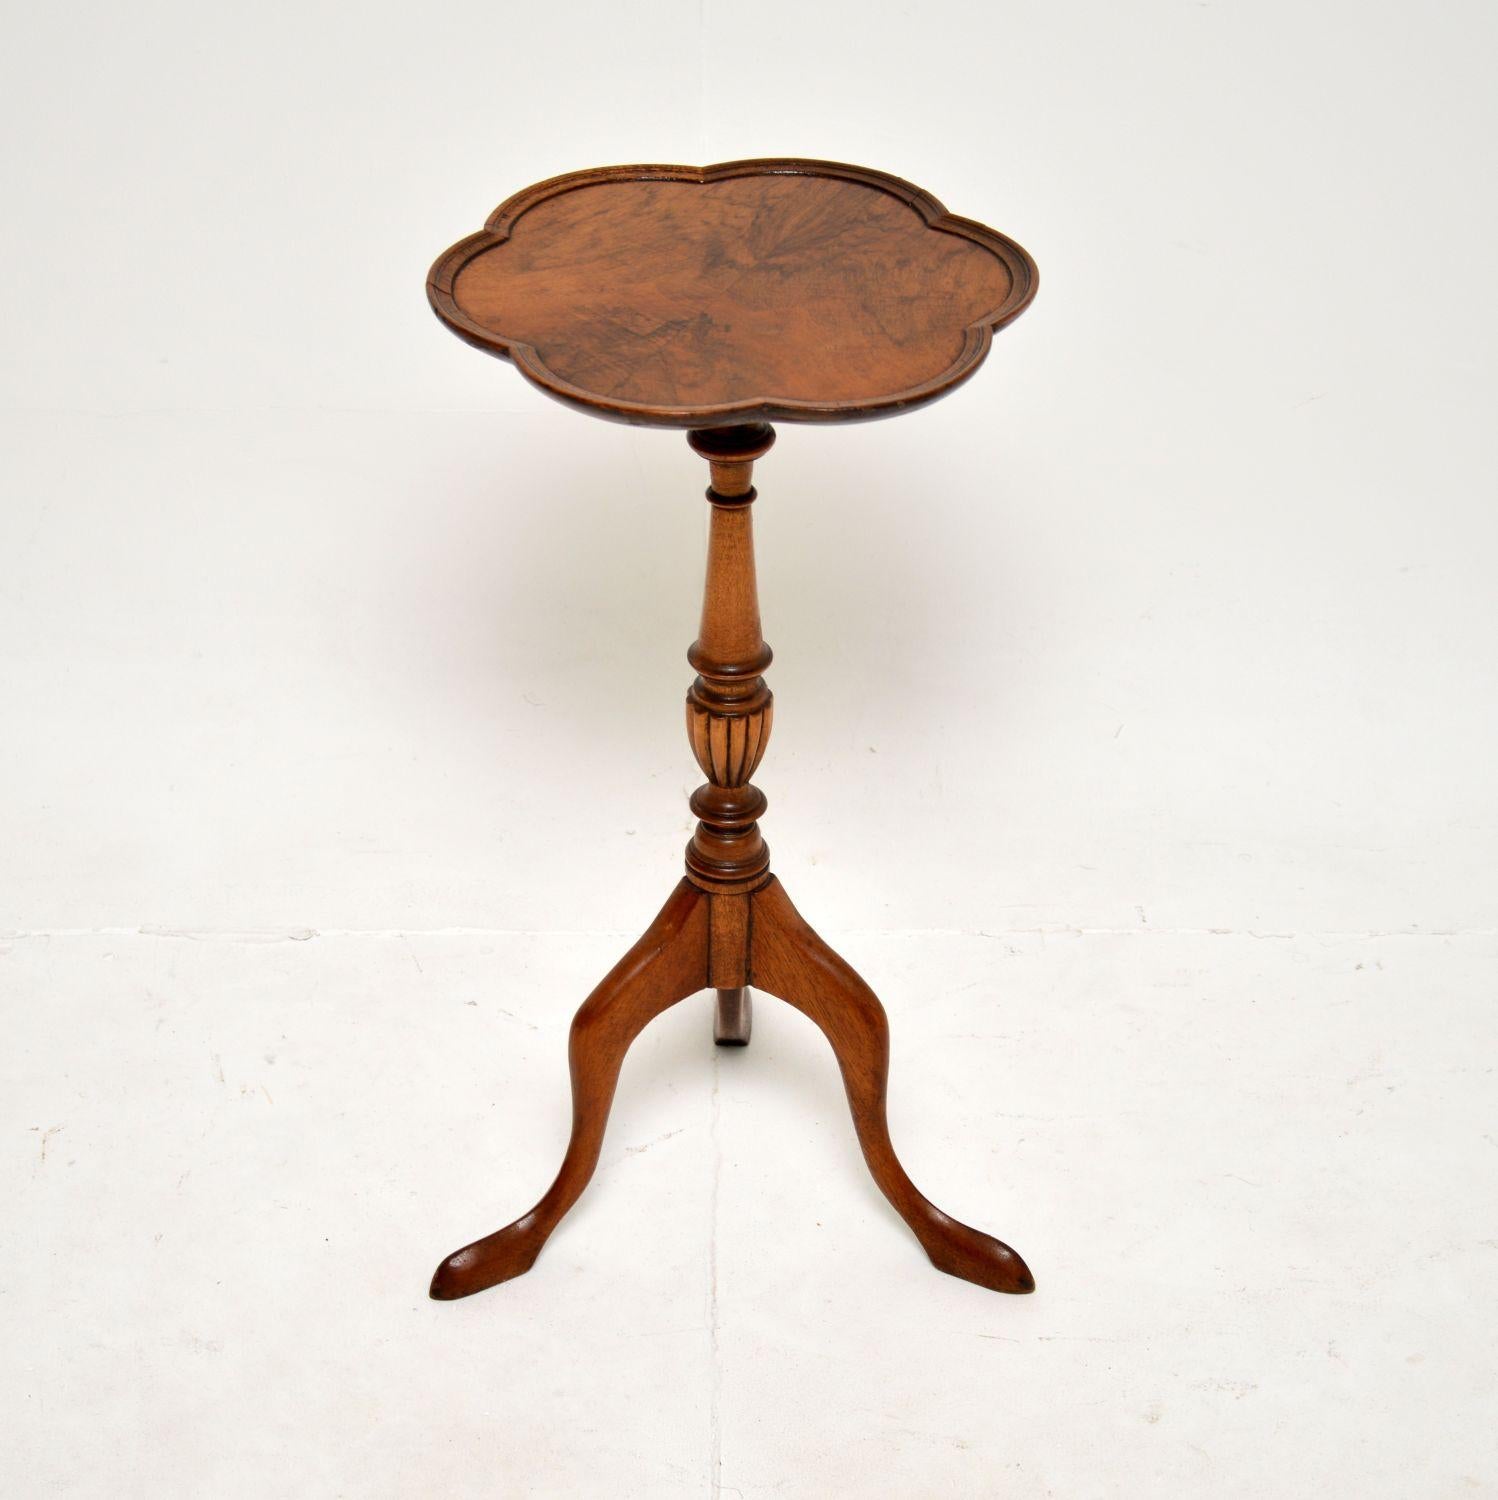 A lovely antique burr walnut wine table. This was made in England, it dates from around the 1930’s.

It is of great quality and is a nice size. The top has a beautiful flower shape with curved edges, and stunning burr walnut grain patterns. This